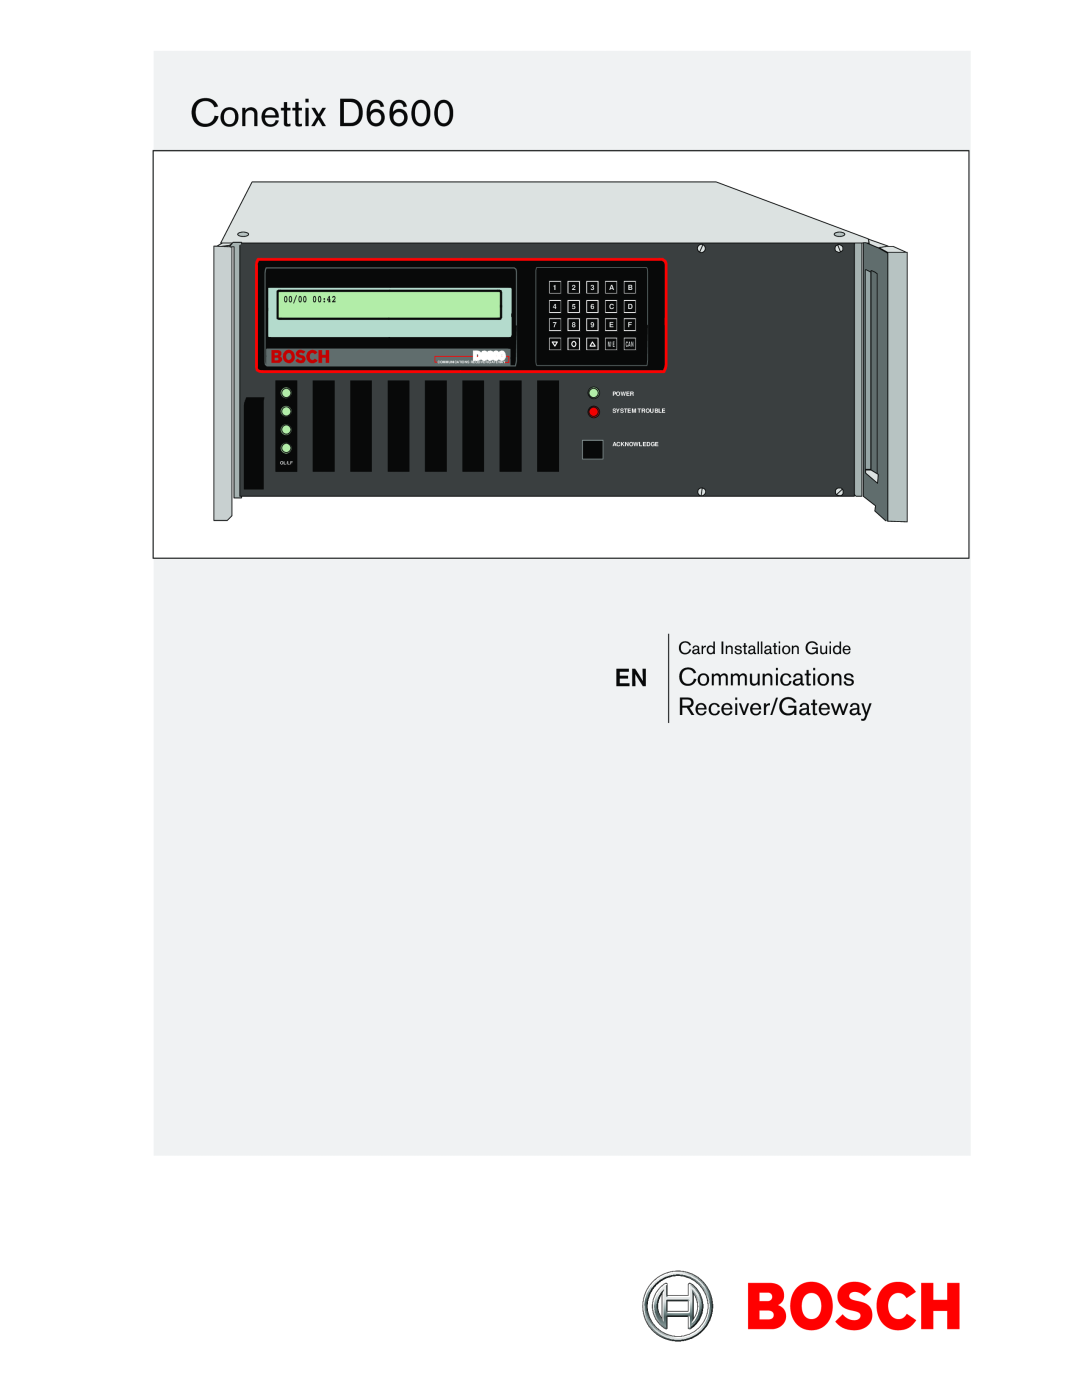 Bosch Appliances installation and operation guide Conettix Communications Receiver/Gate- way, D6600/D6100IPv6 